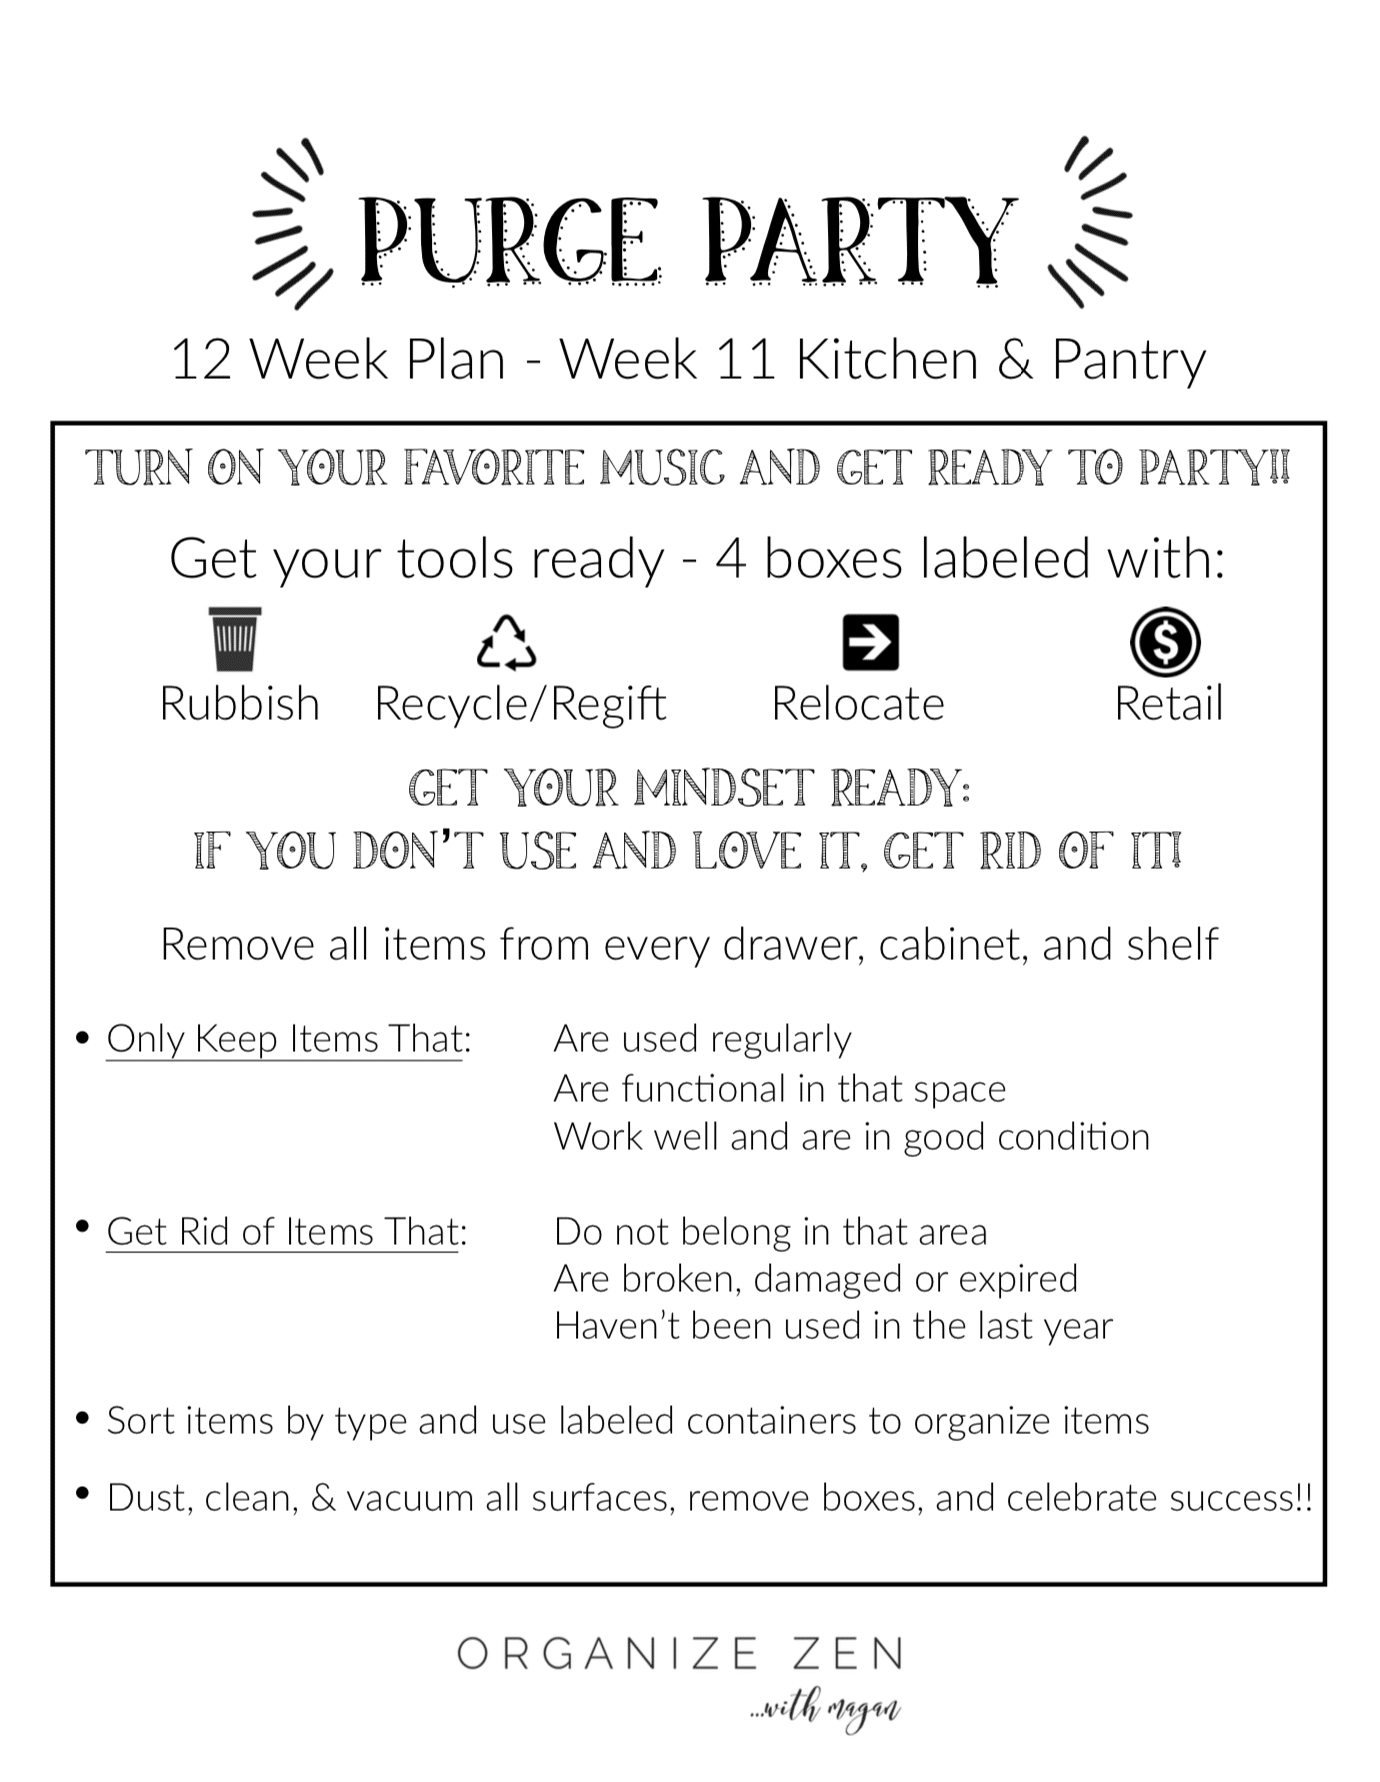 Purge Party Printable for Kitchen Organization Process